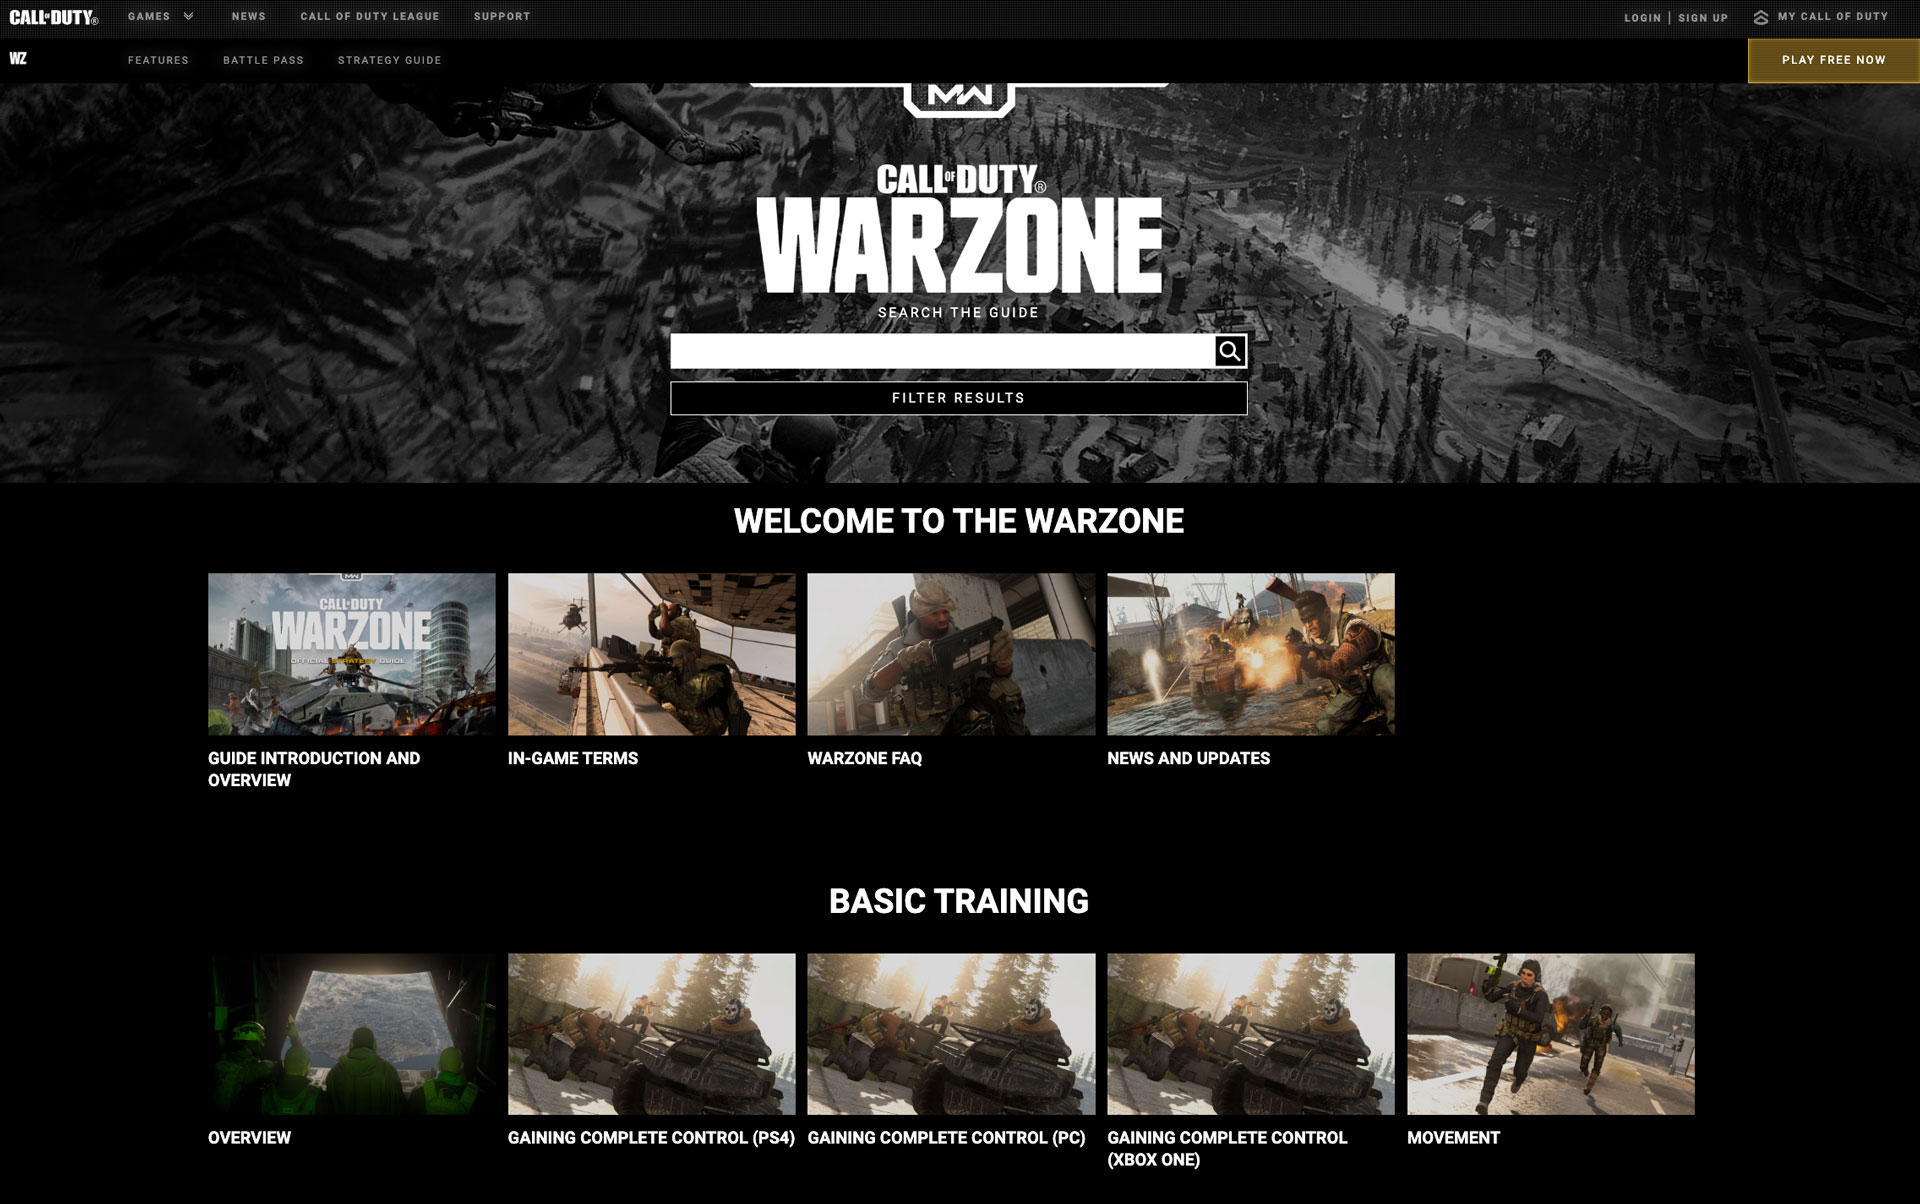 Announcing The Official Warzone Strategy Guide Available Free On March 10